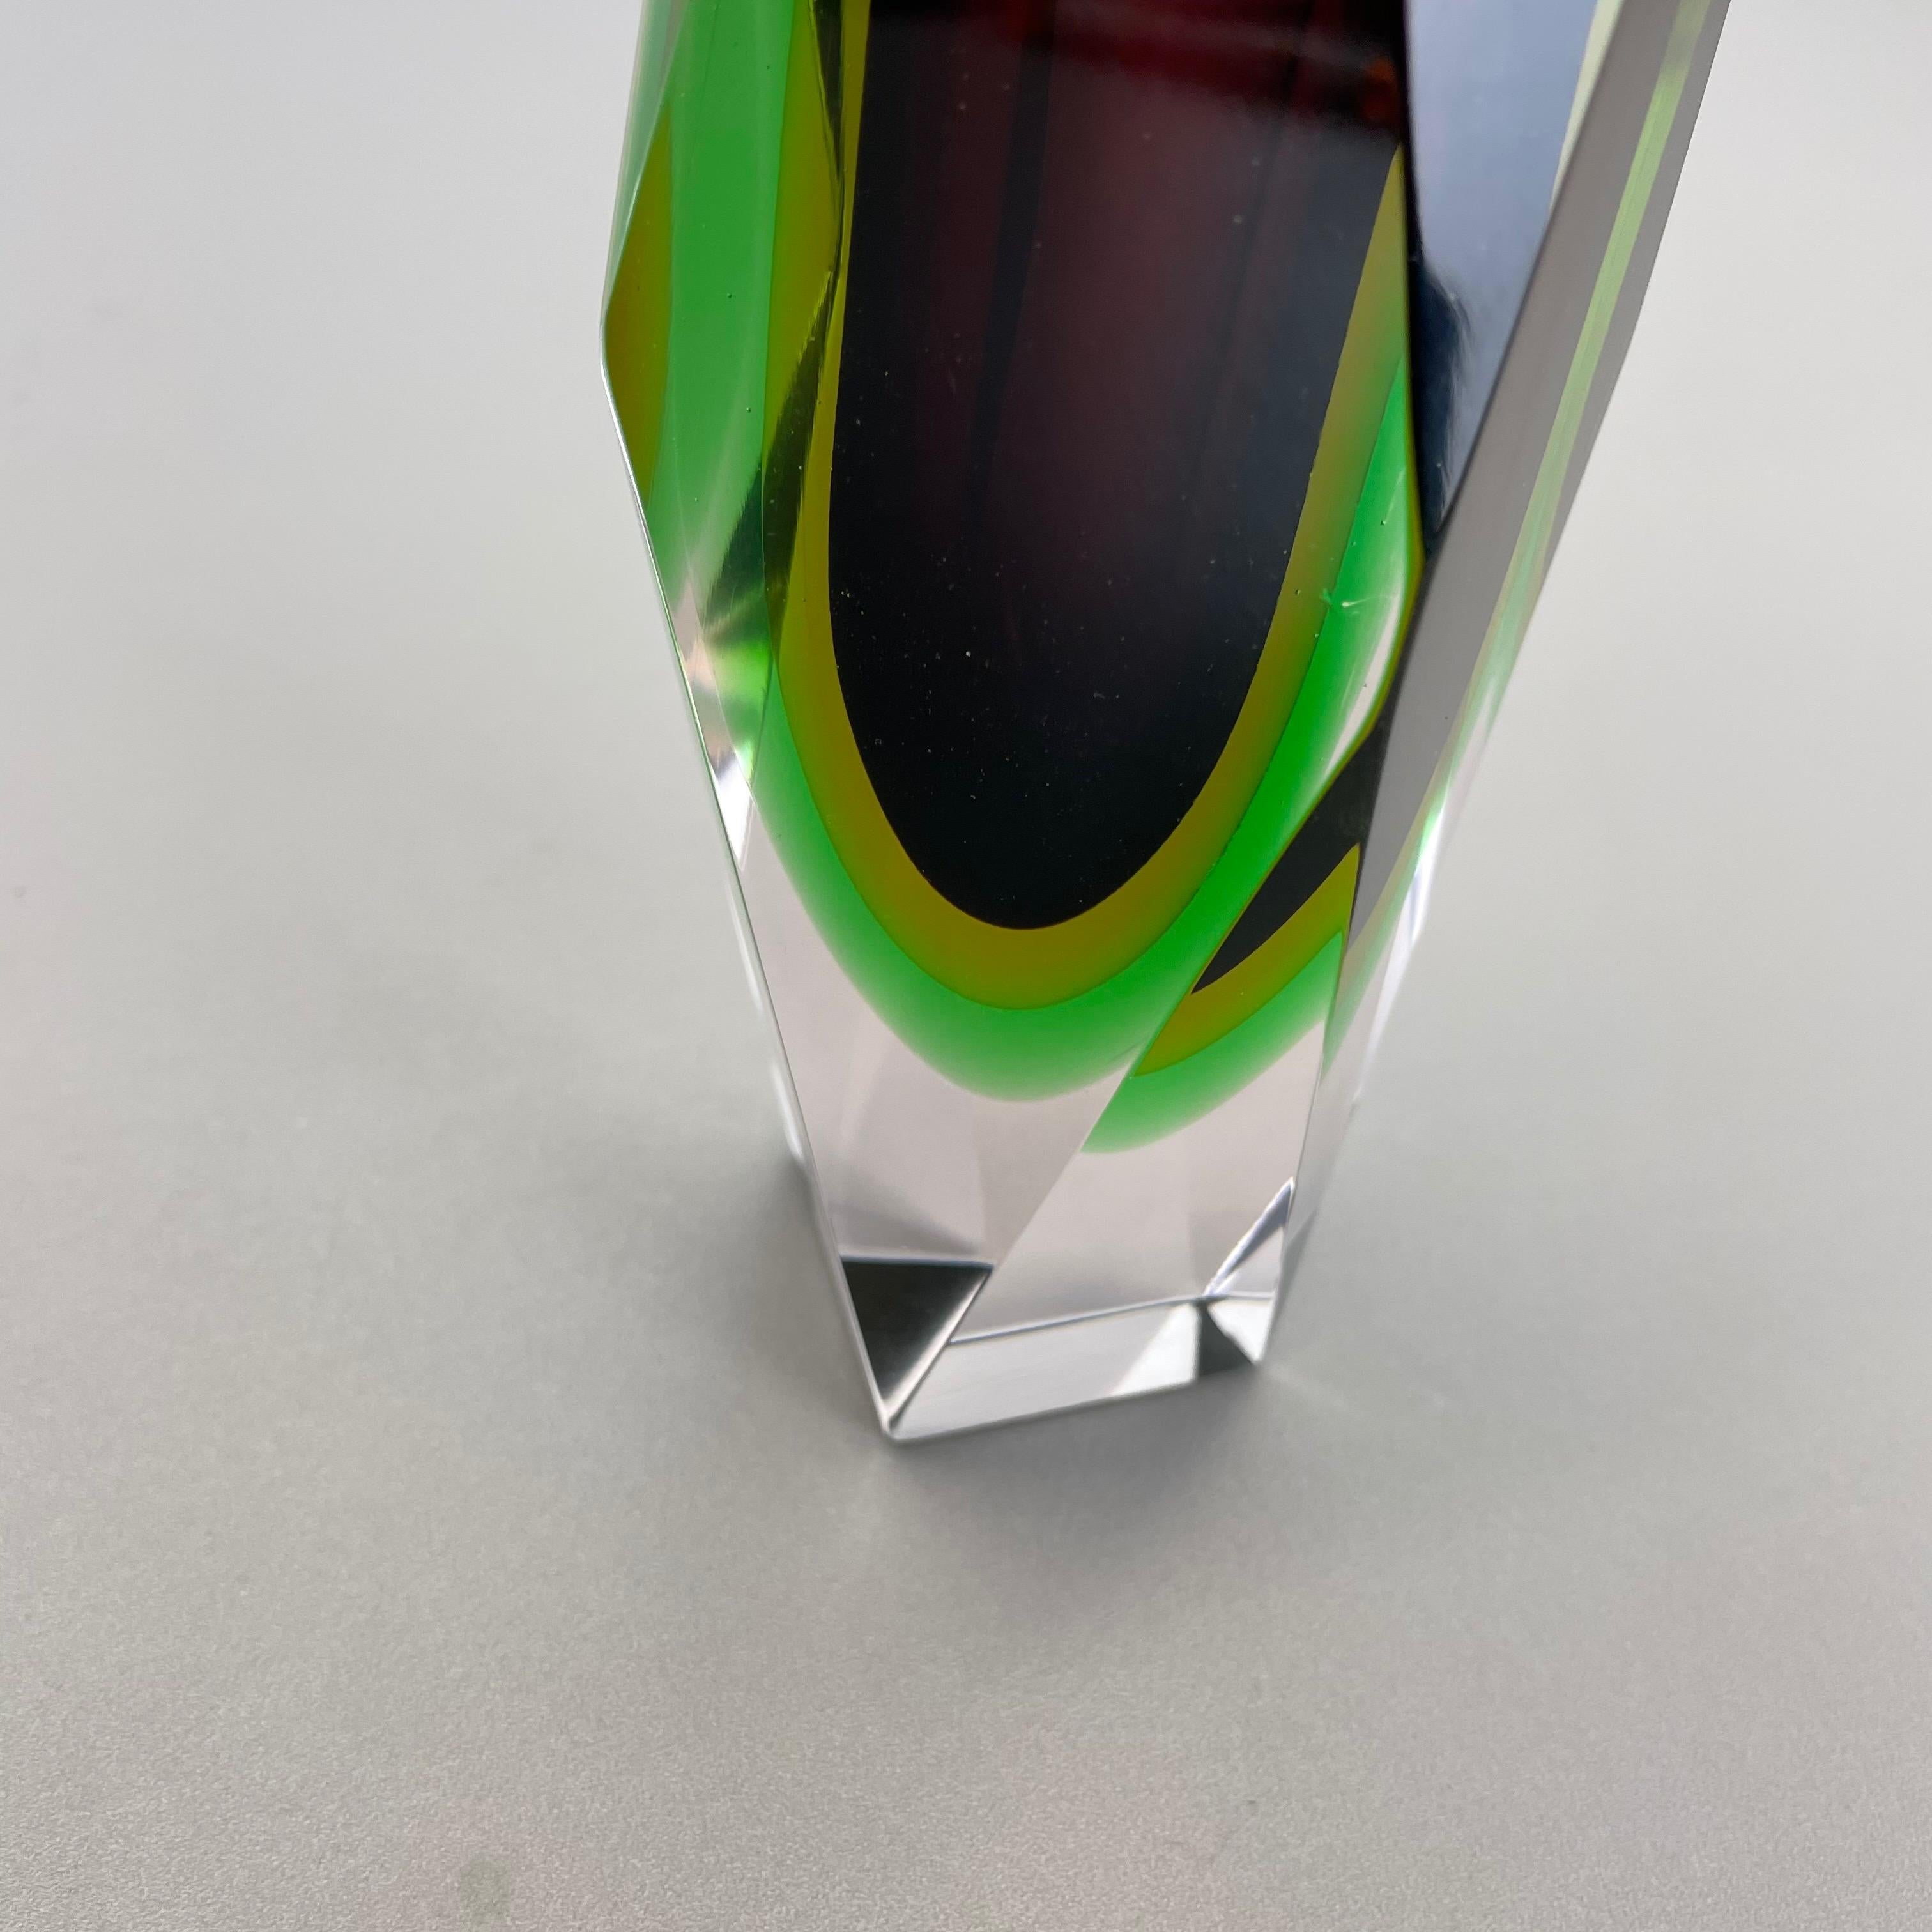 Heavy Large Murano Glass Sommerso 4 Colors Vase by Flavio Poli, Italy, 1970s For Sale 4